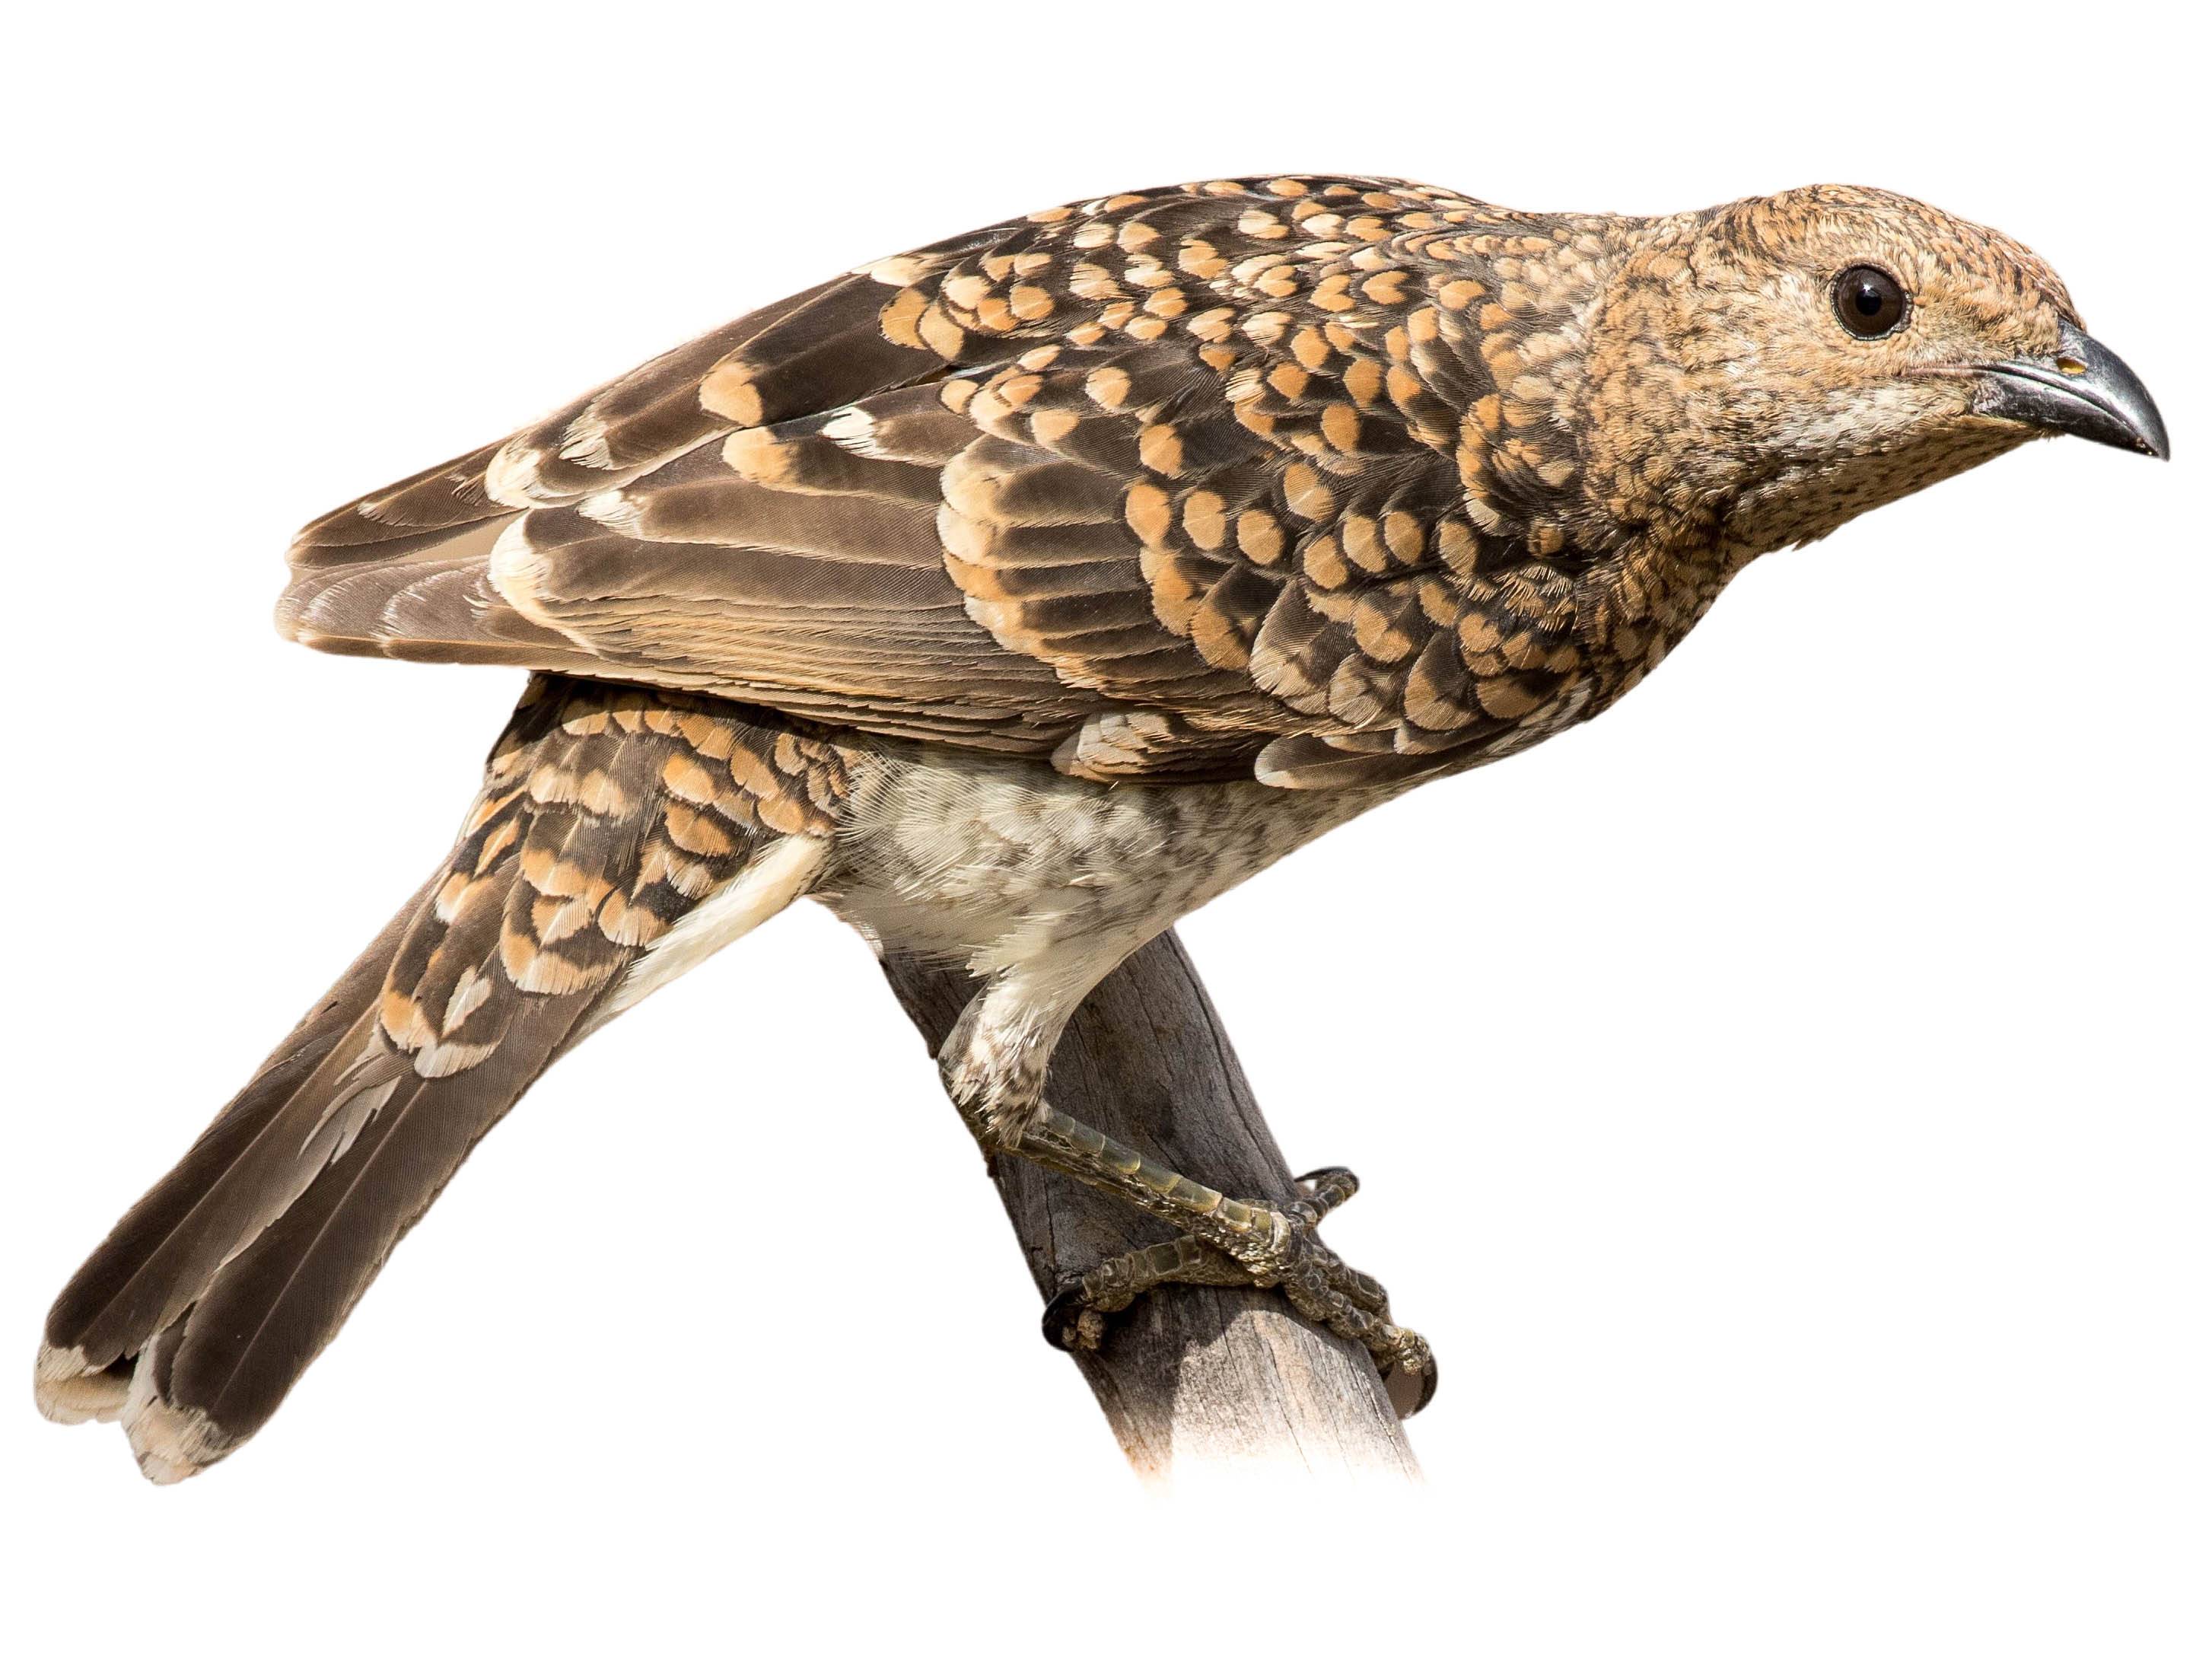 A photo of a Spotted Bowerbird (Chlamydera maculata)